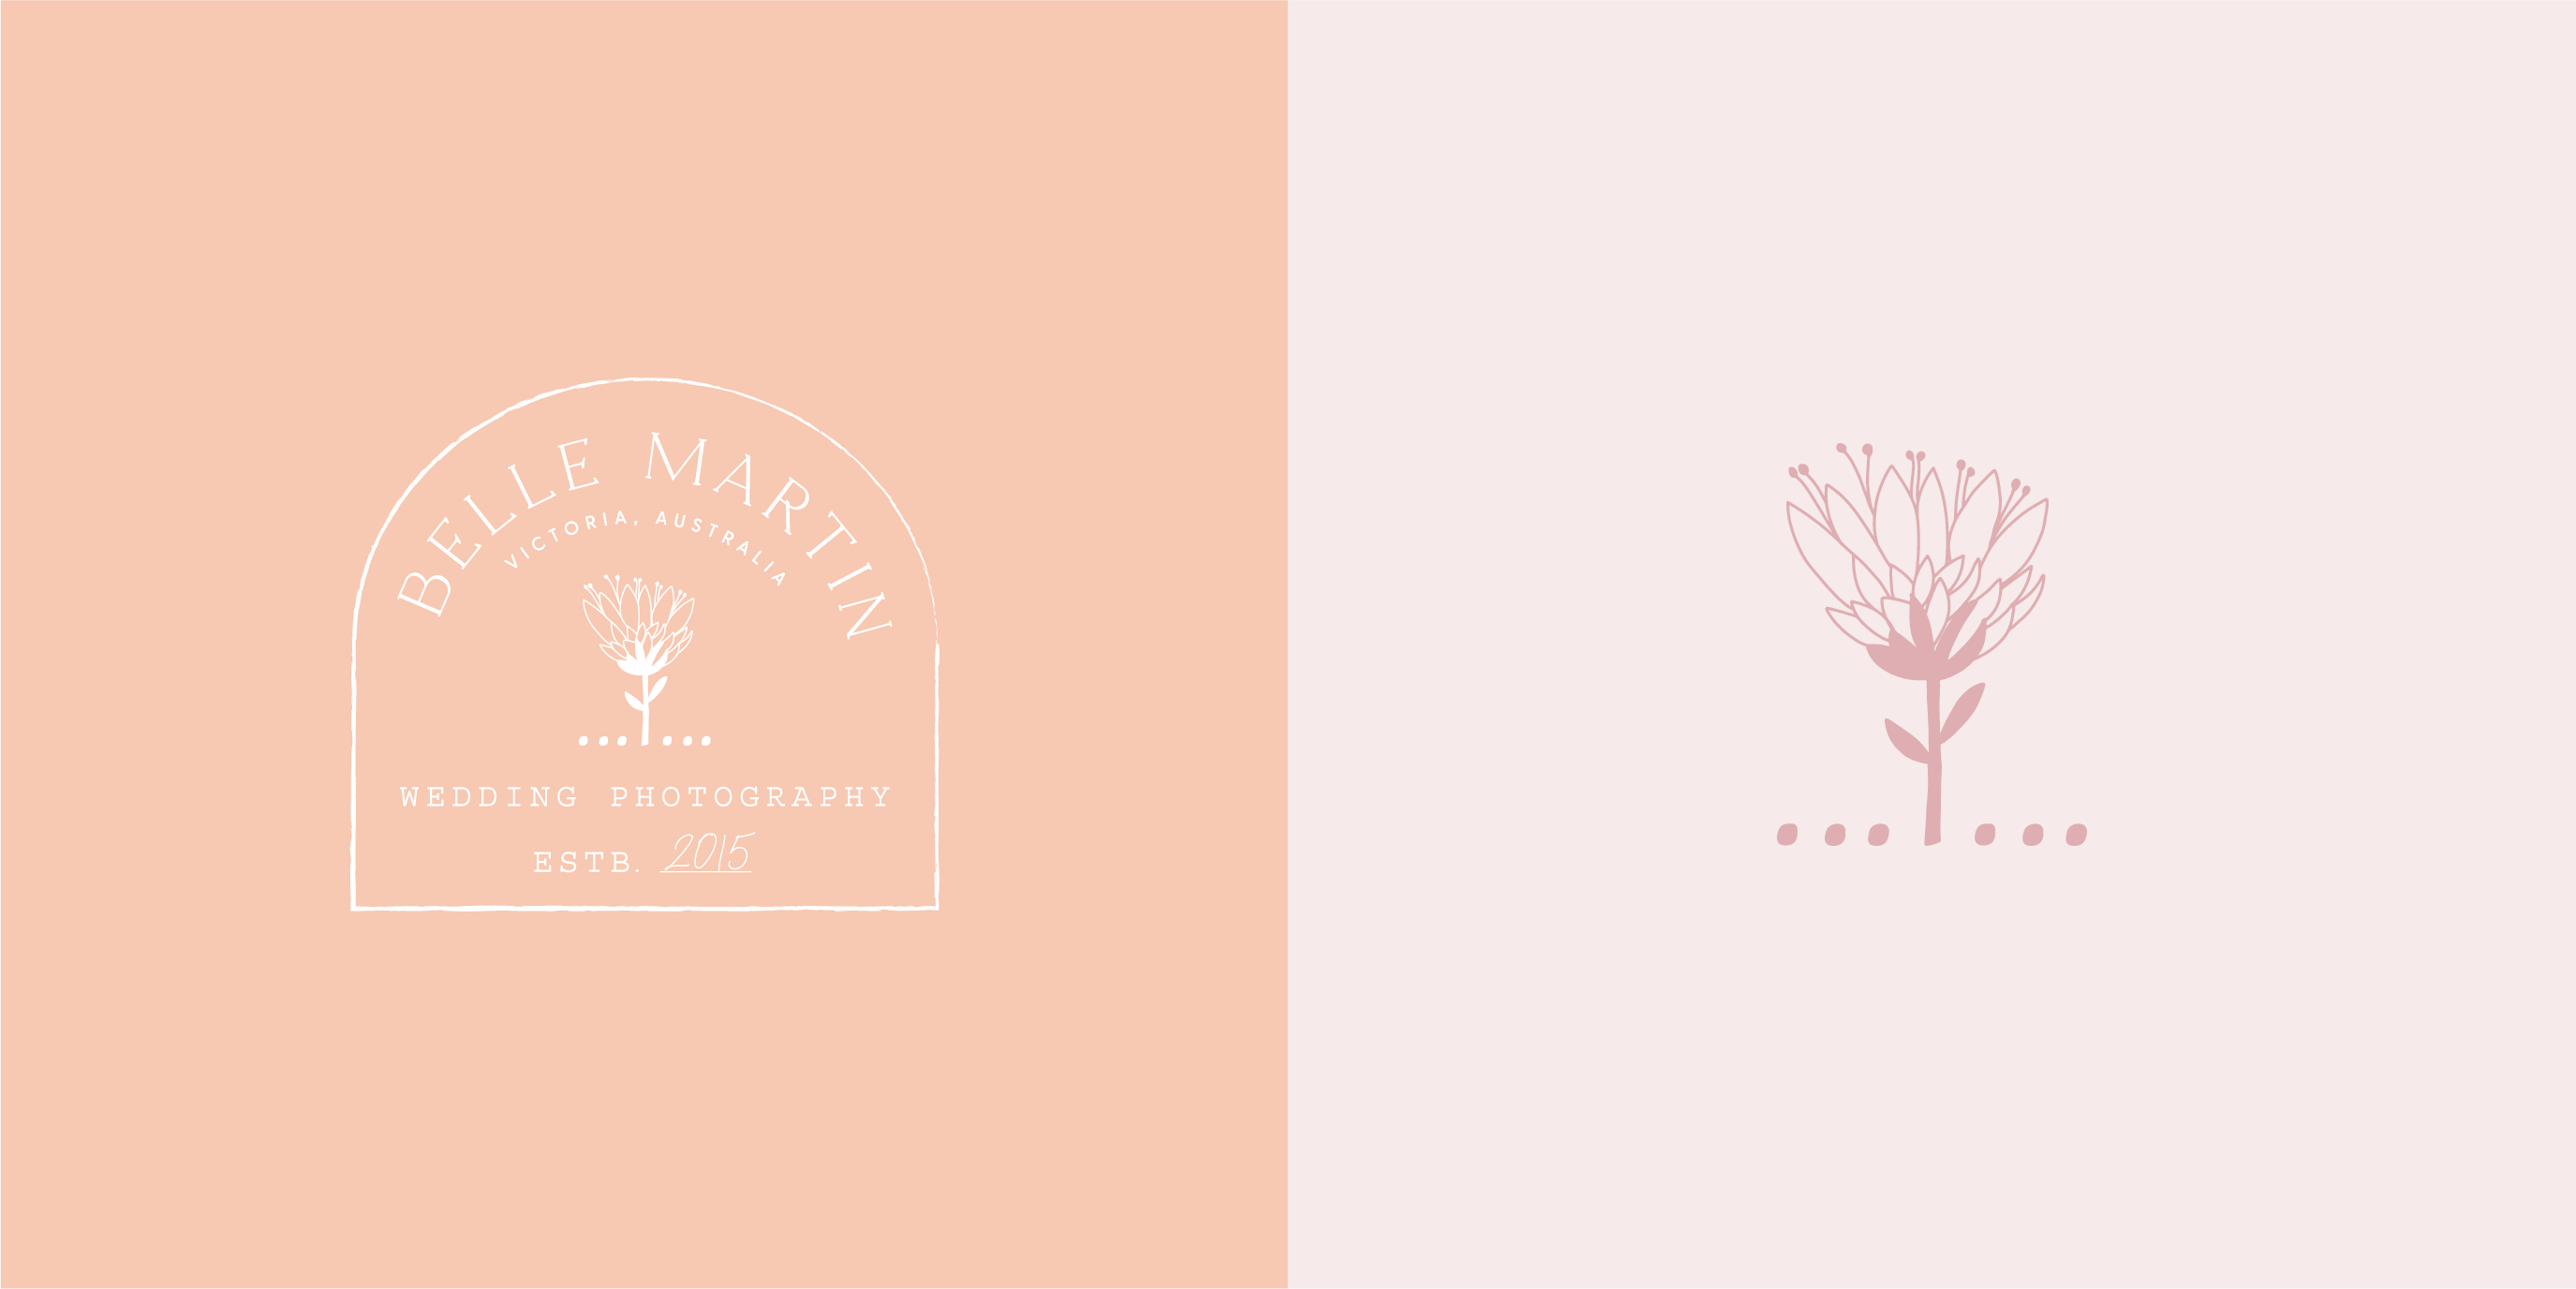 Two logos designed for Belle Martin Photography. 